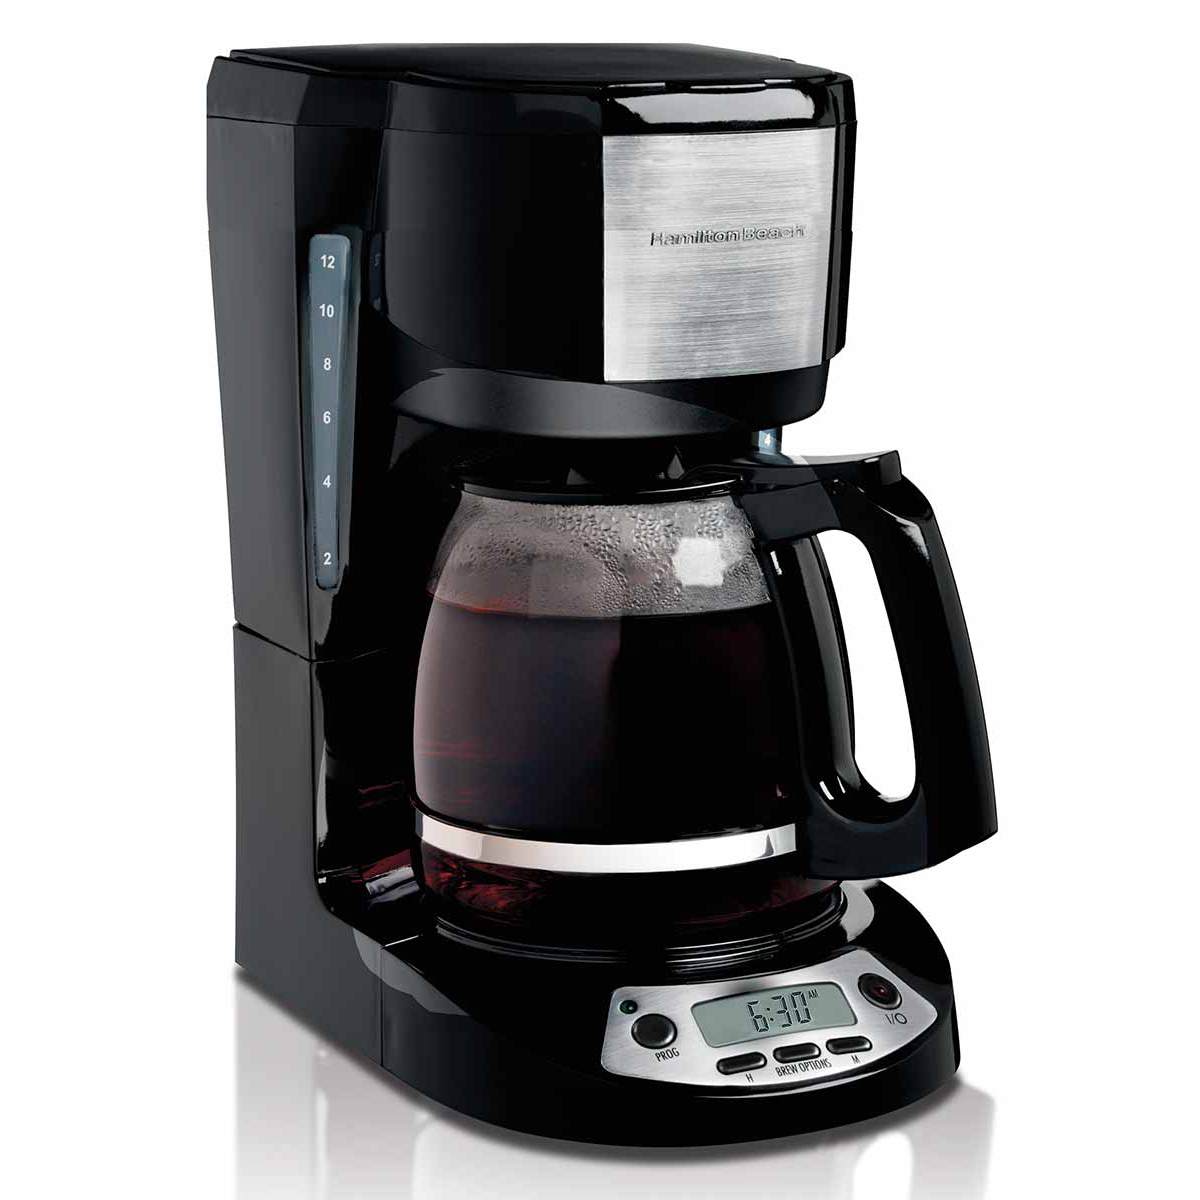 Hamilton Beach Coffee Maker 12-Cup Programmable with 3